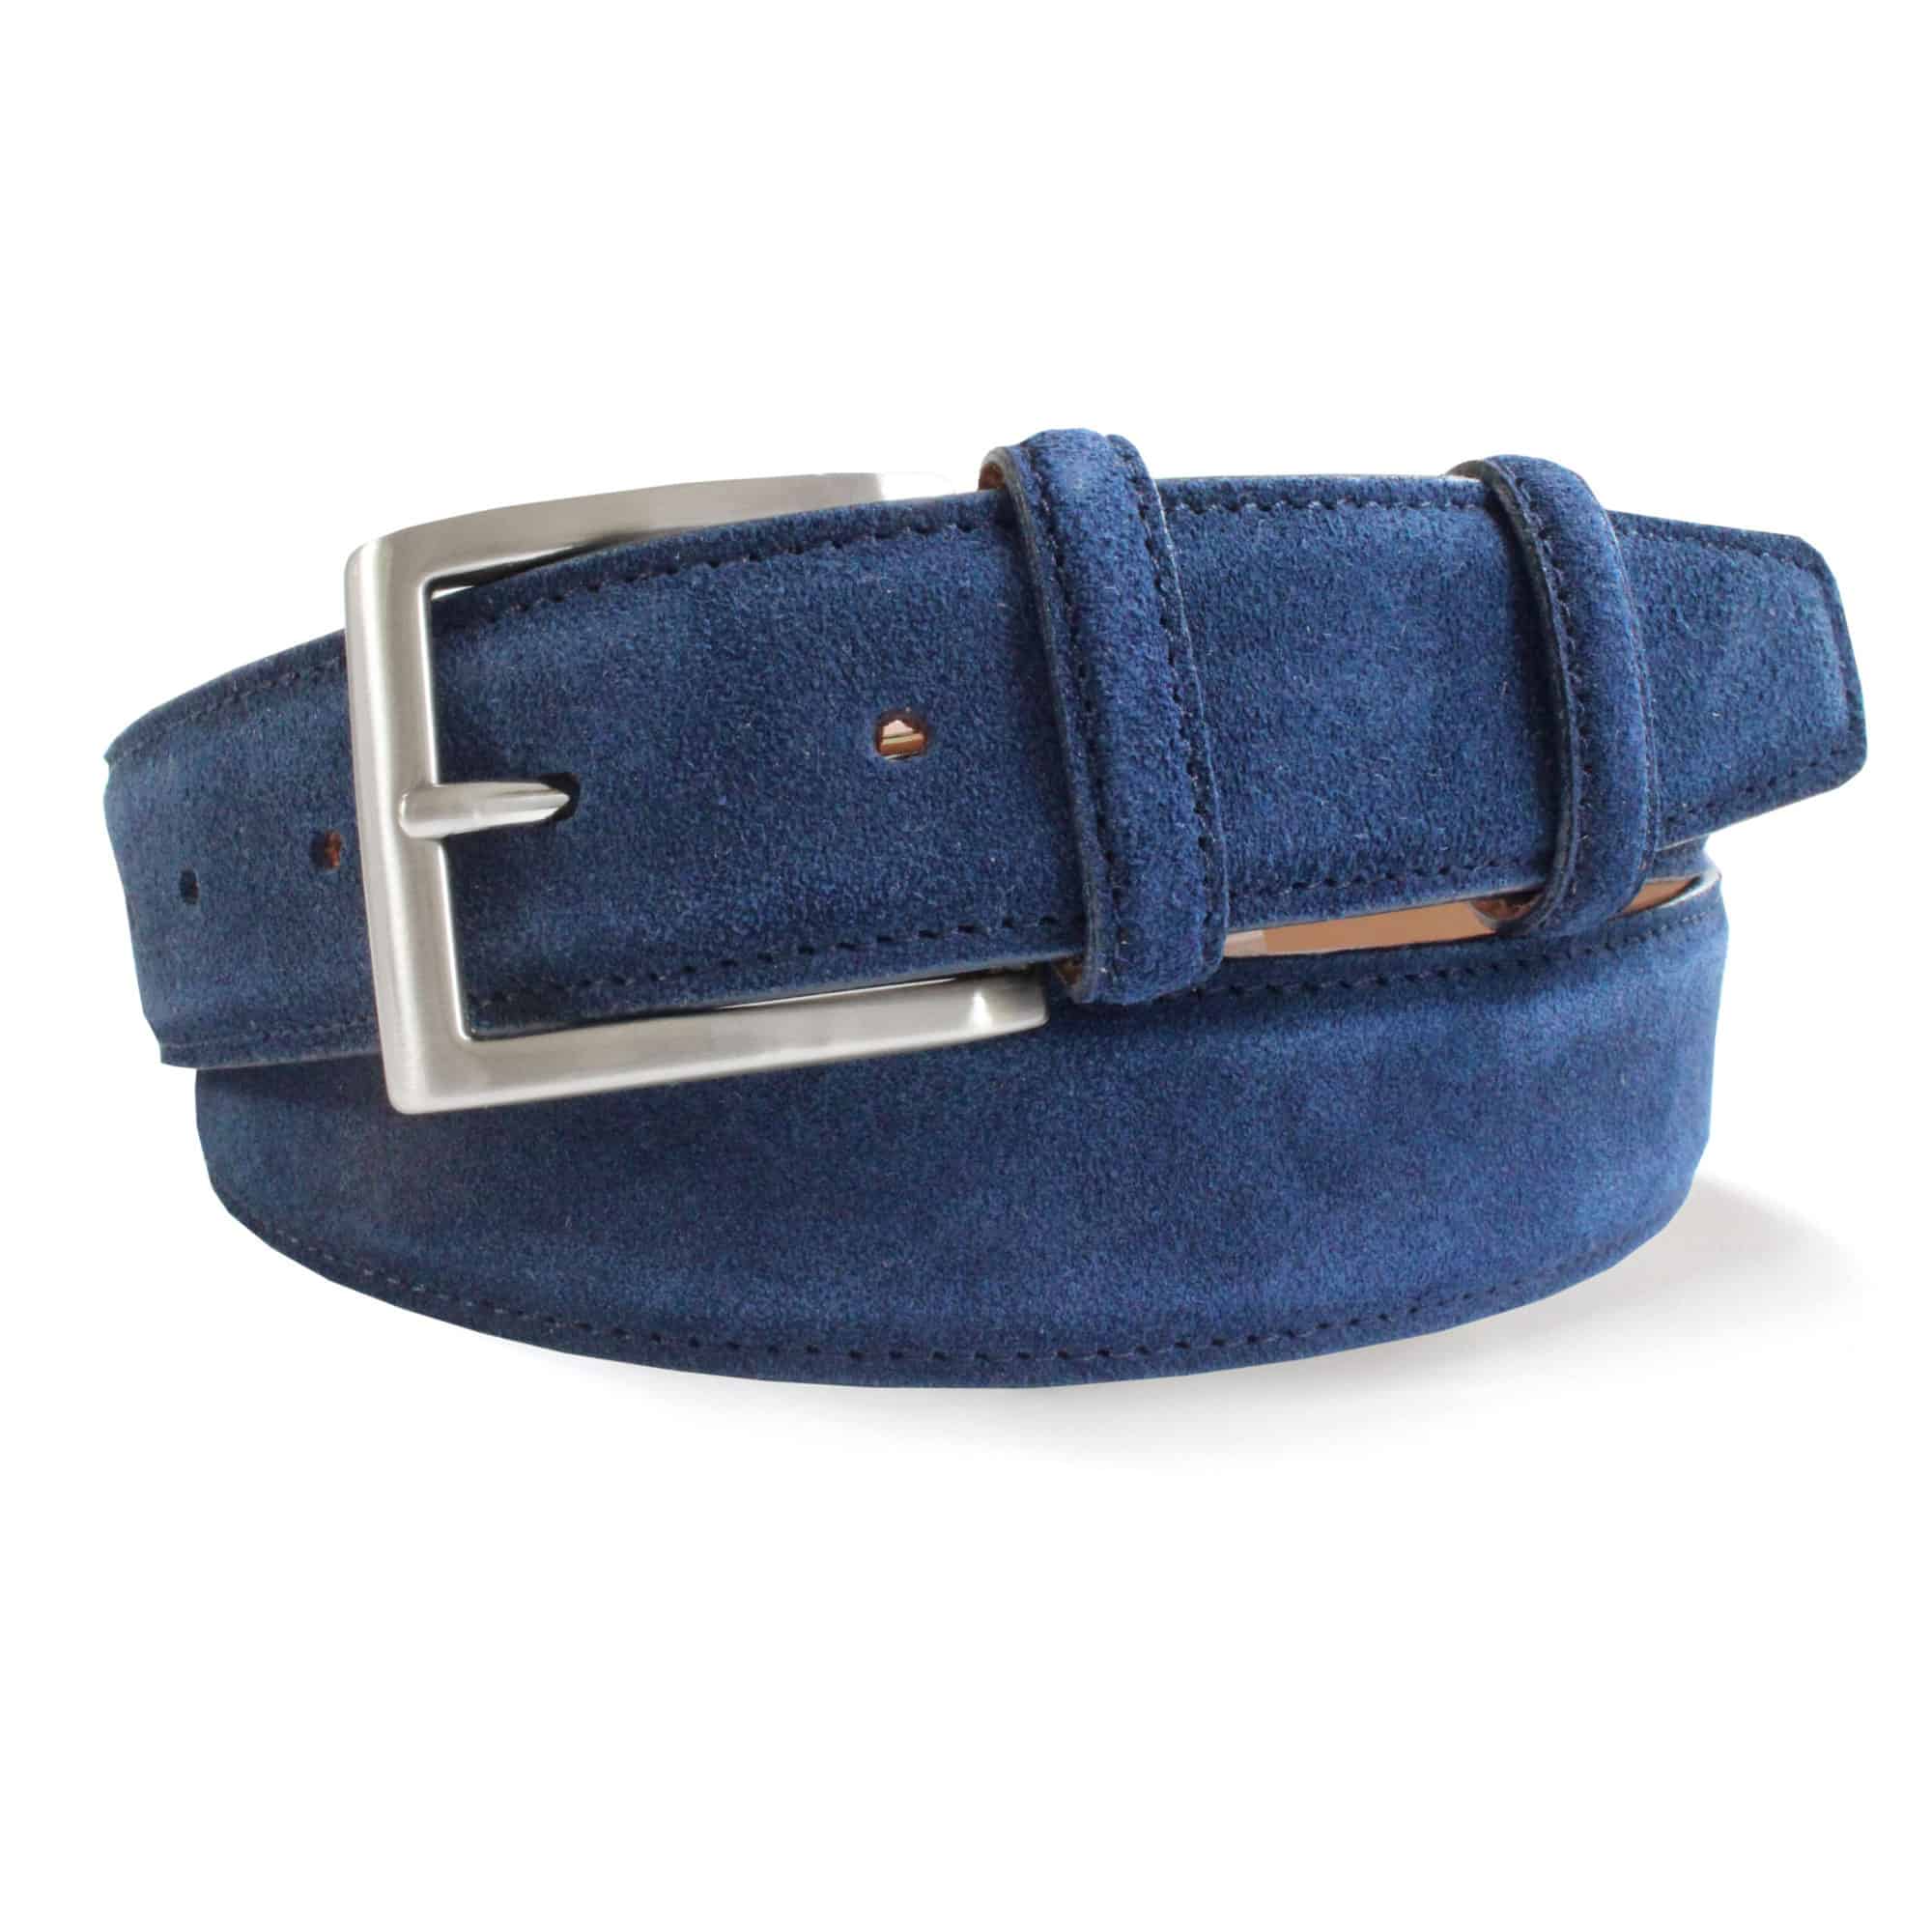 Blue Suede Belt by Smart Clothes York Yorkshire